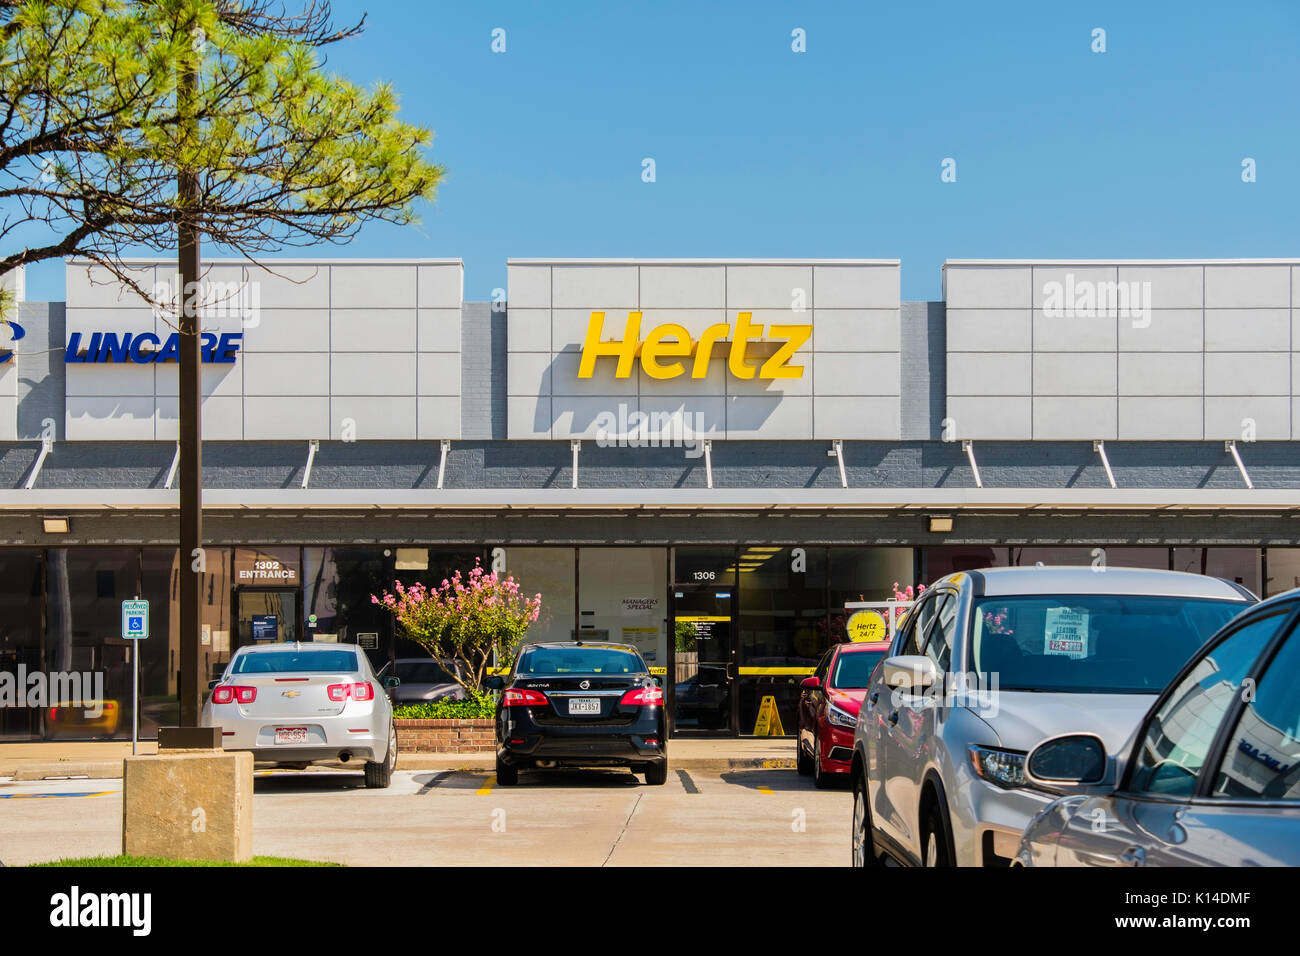 Exterior storefront of Hertz rent a car in a strip mall. Norman, Oklahoma, USA. Stock Photo